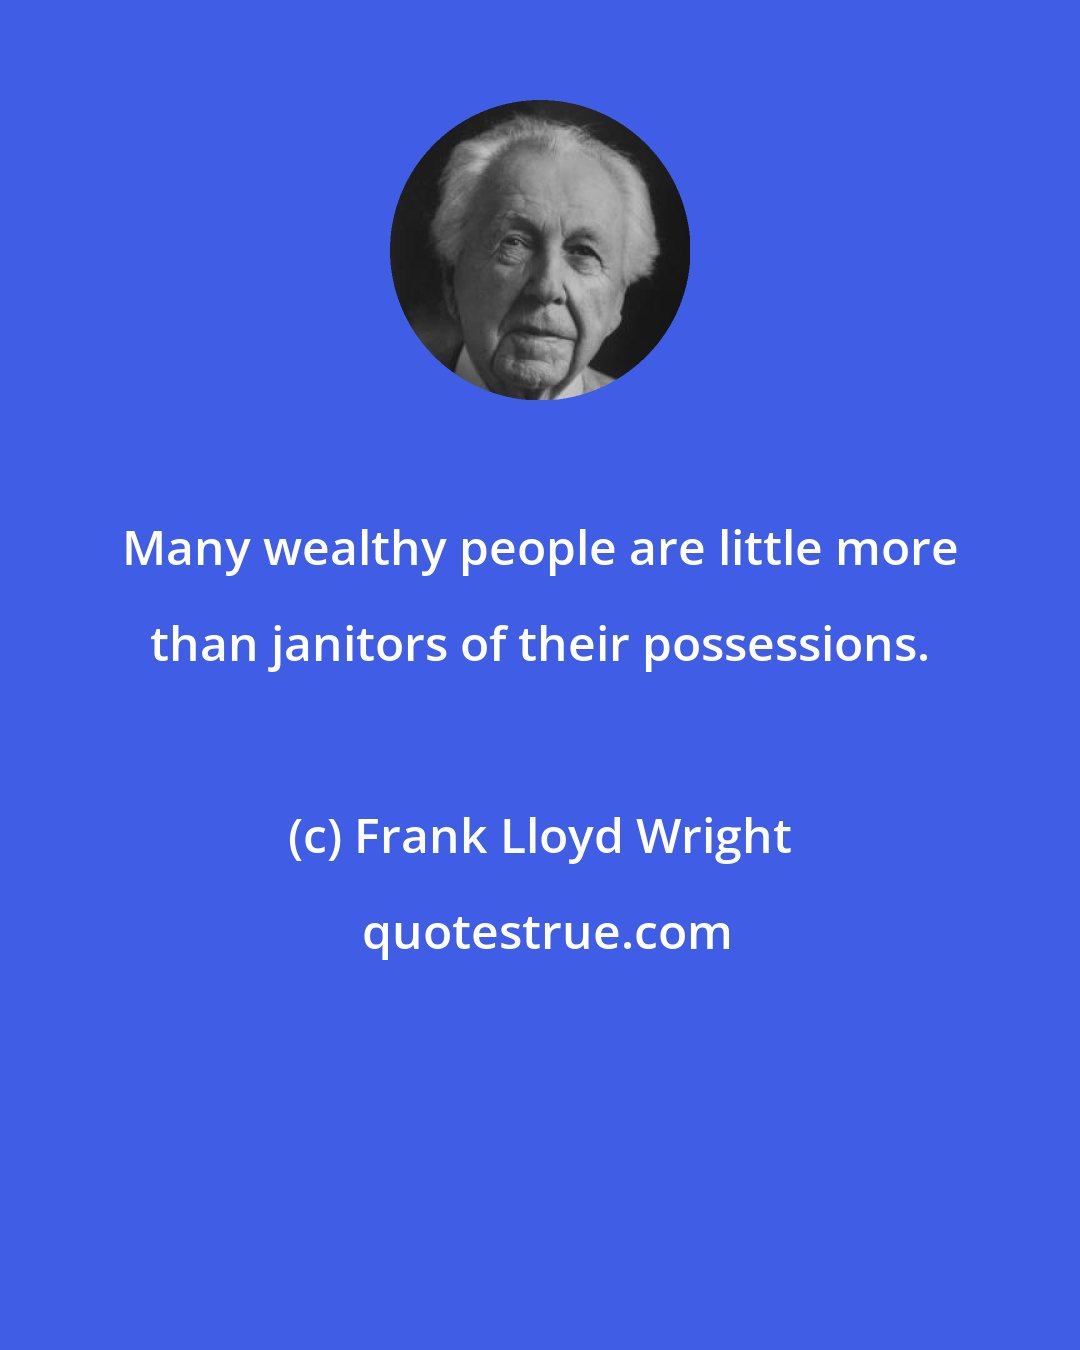 Frank Lloyd Wright: Many wealthy people are little more than janitors of their possessions.